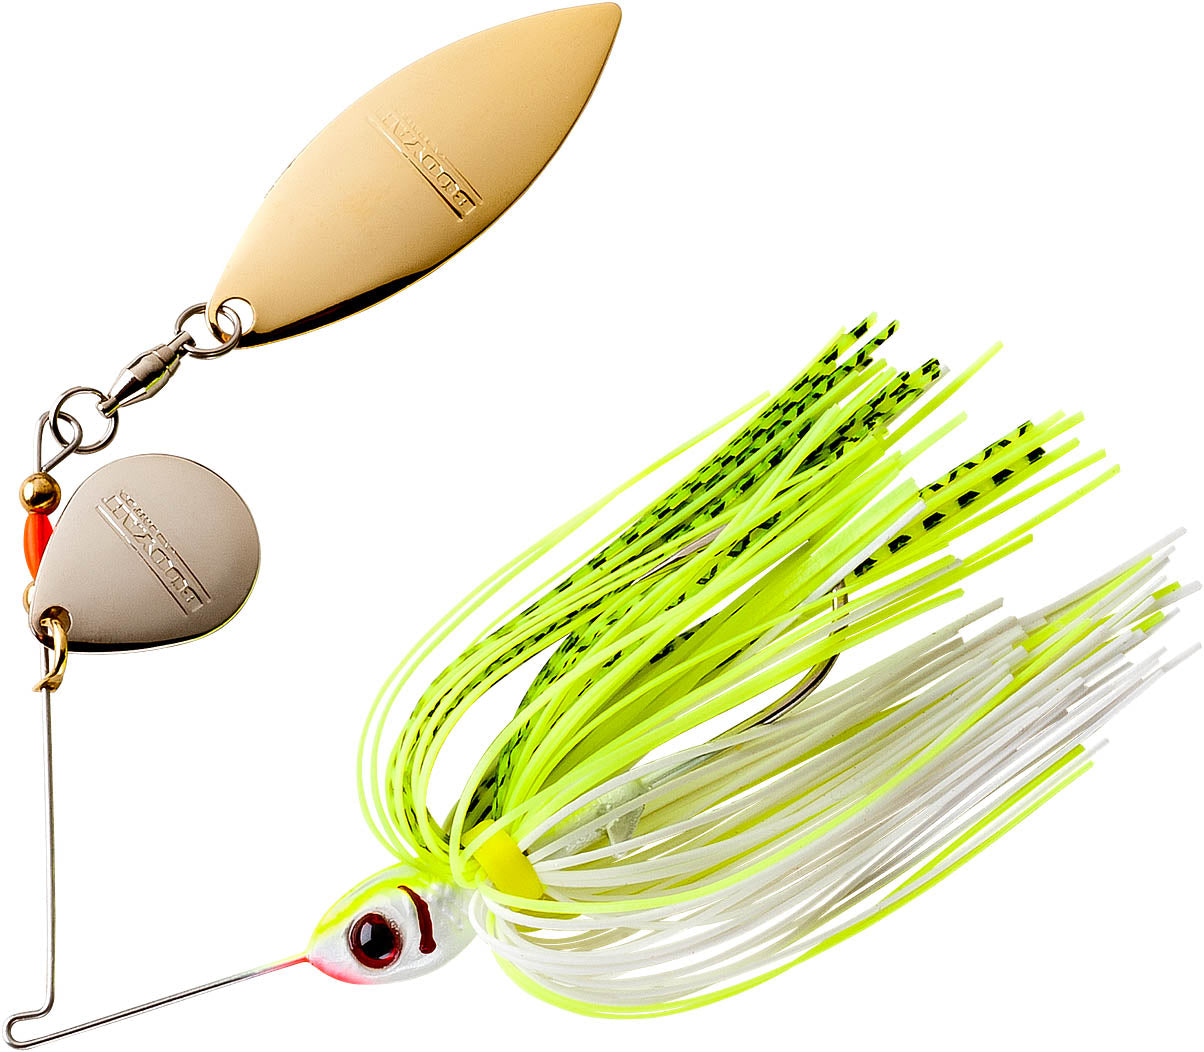 Booyah Tandem Blade Spinnerbait 1/4 oz Chartreuse White Shad